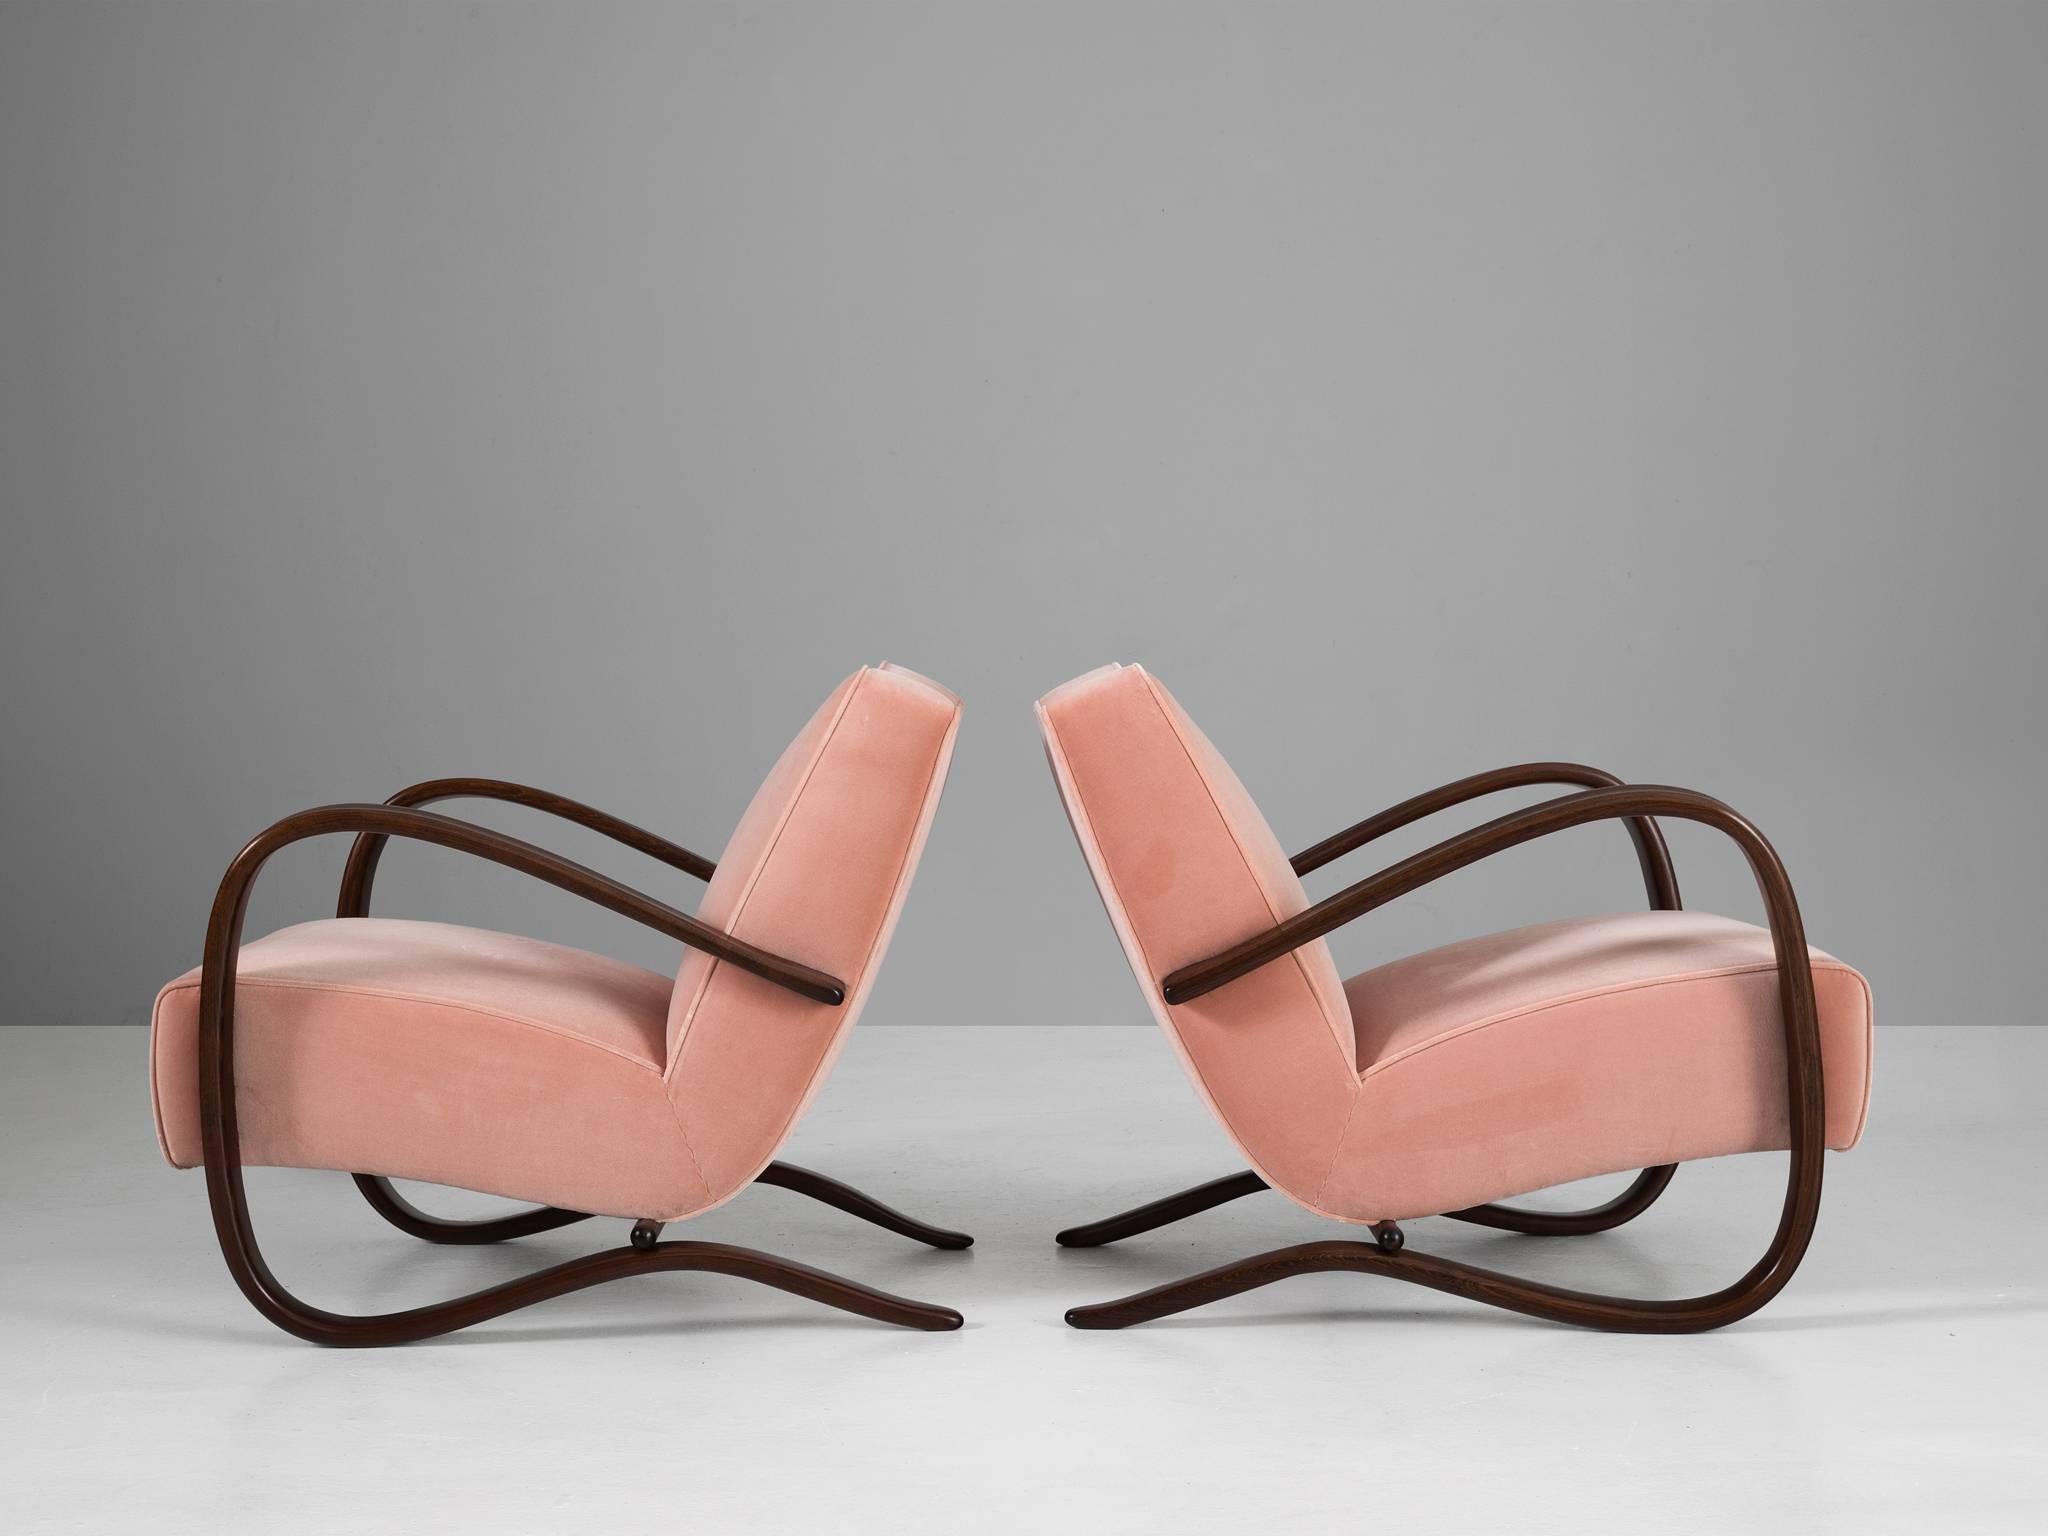 Set of two armchairs, in beech and pink fabric by Jindrich Halabala, Czech Republic, 1930s. 

These chairs have a very dynamic appearance, due the curved base that ends fluently in the armrests. The dark brown stained wood combines nicely with the